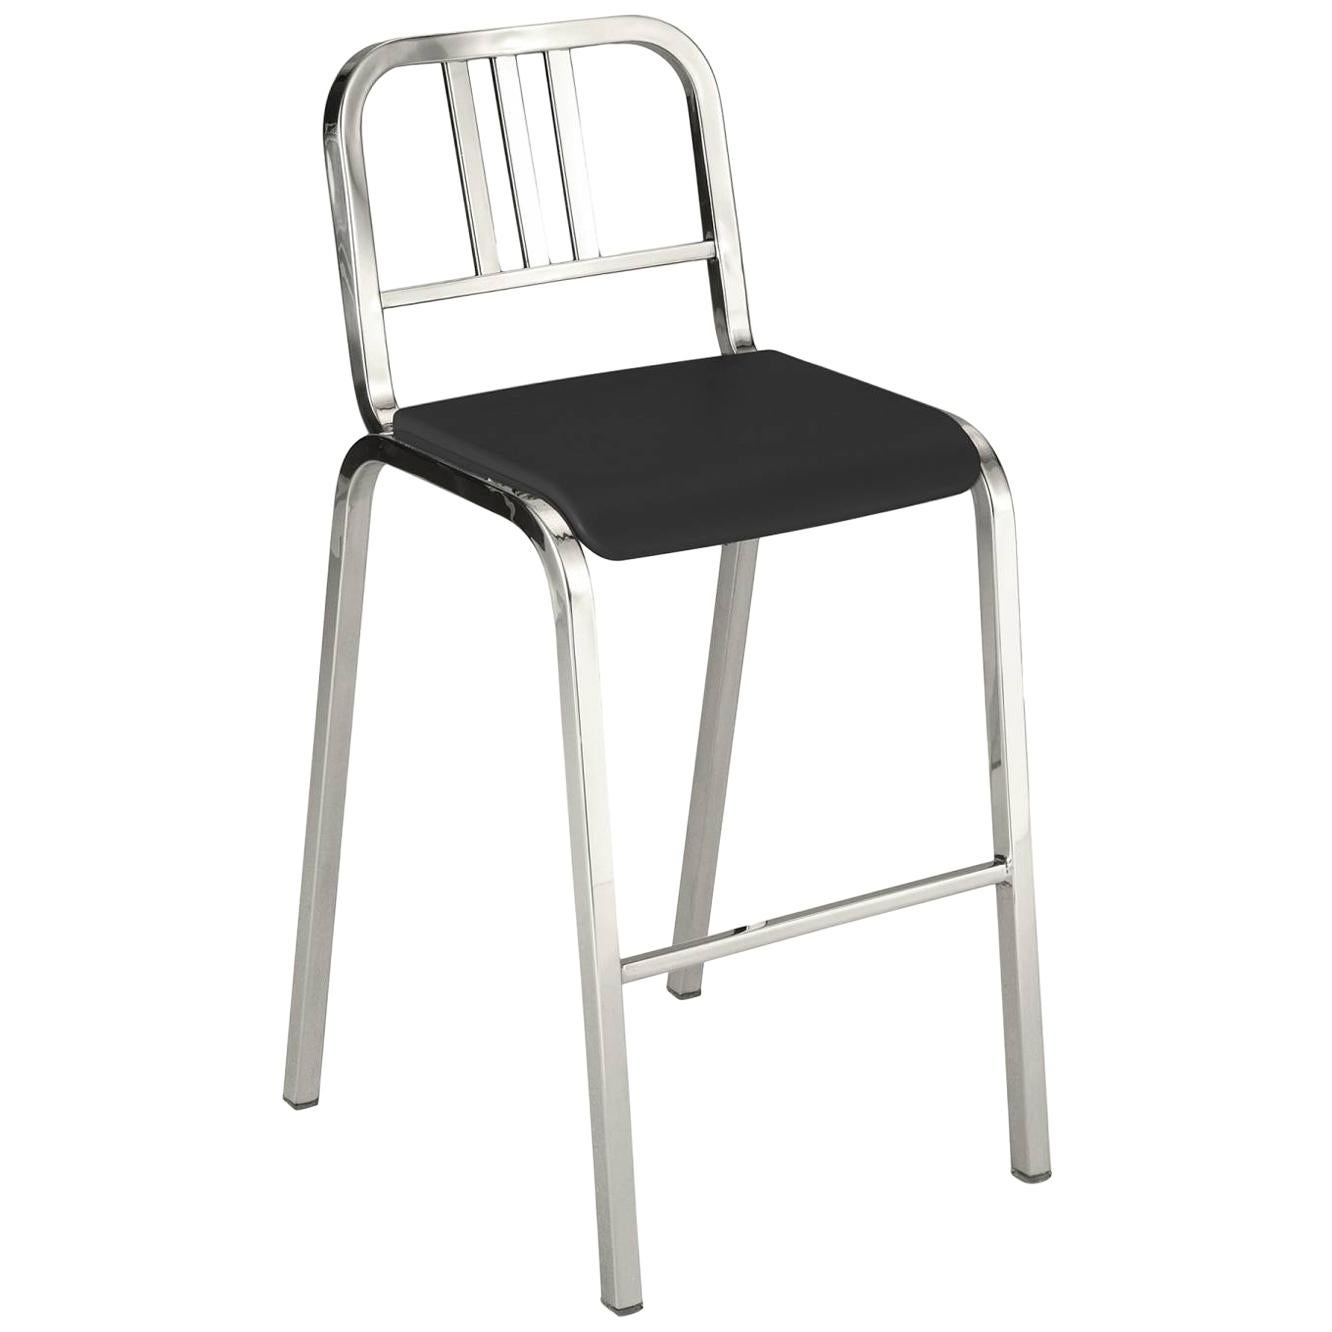 Emeco Nine-0 Barstool in Polished Aluminum with Gray Seat by Ettore Sottsass